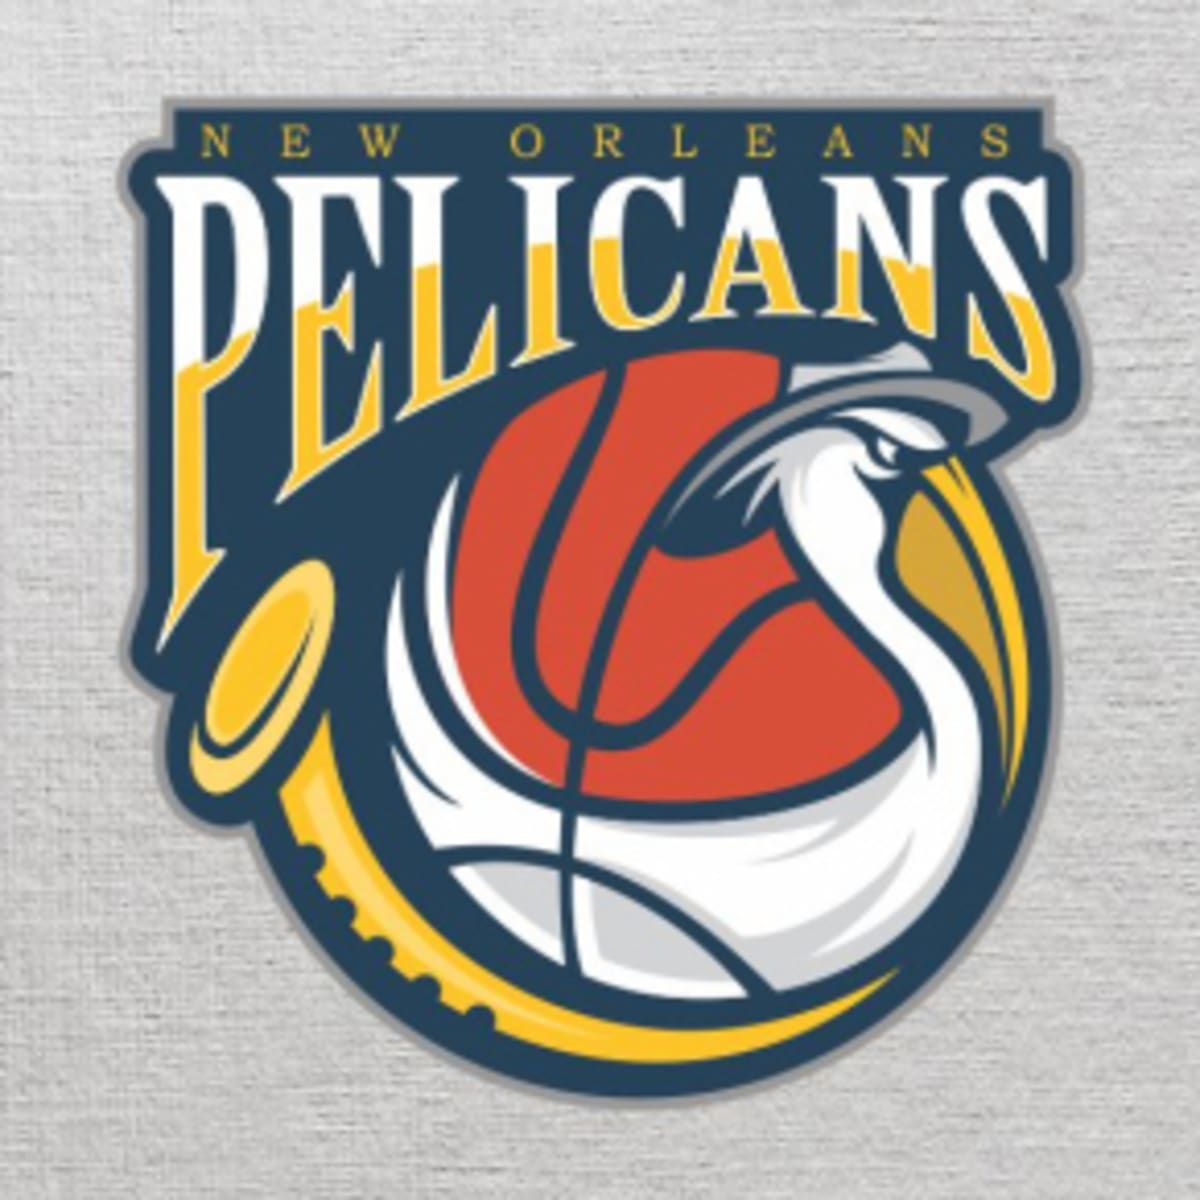 New Orleans Hornets to Change Their Name to Pelicans - Welcome to Loud City